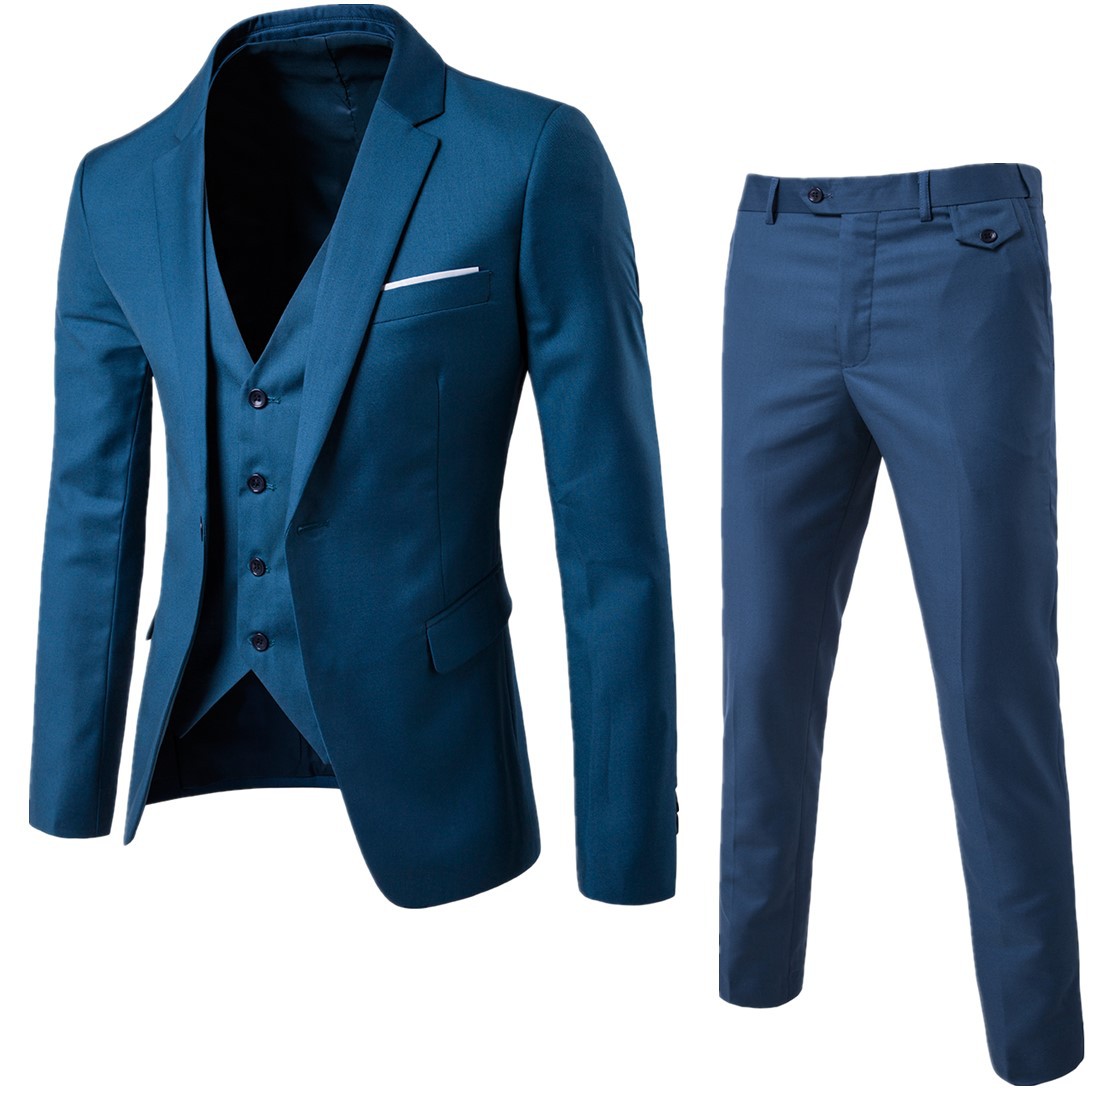 Business suits three-piece professional suits for men and women available now